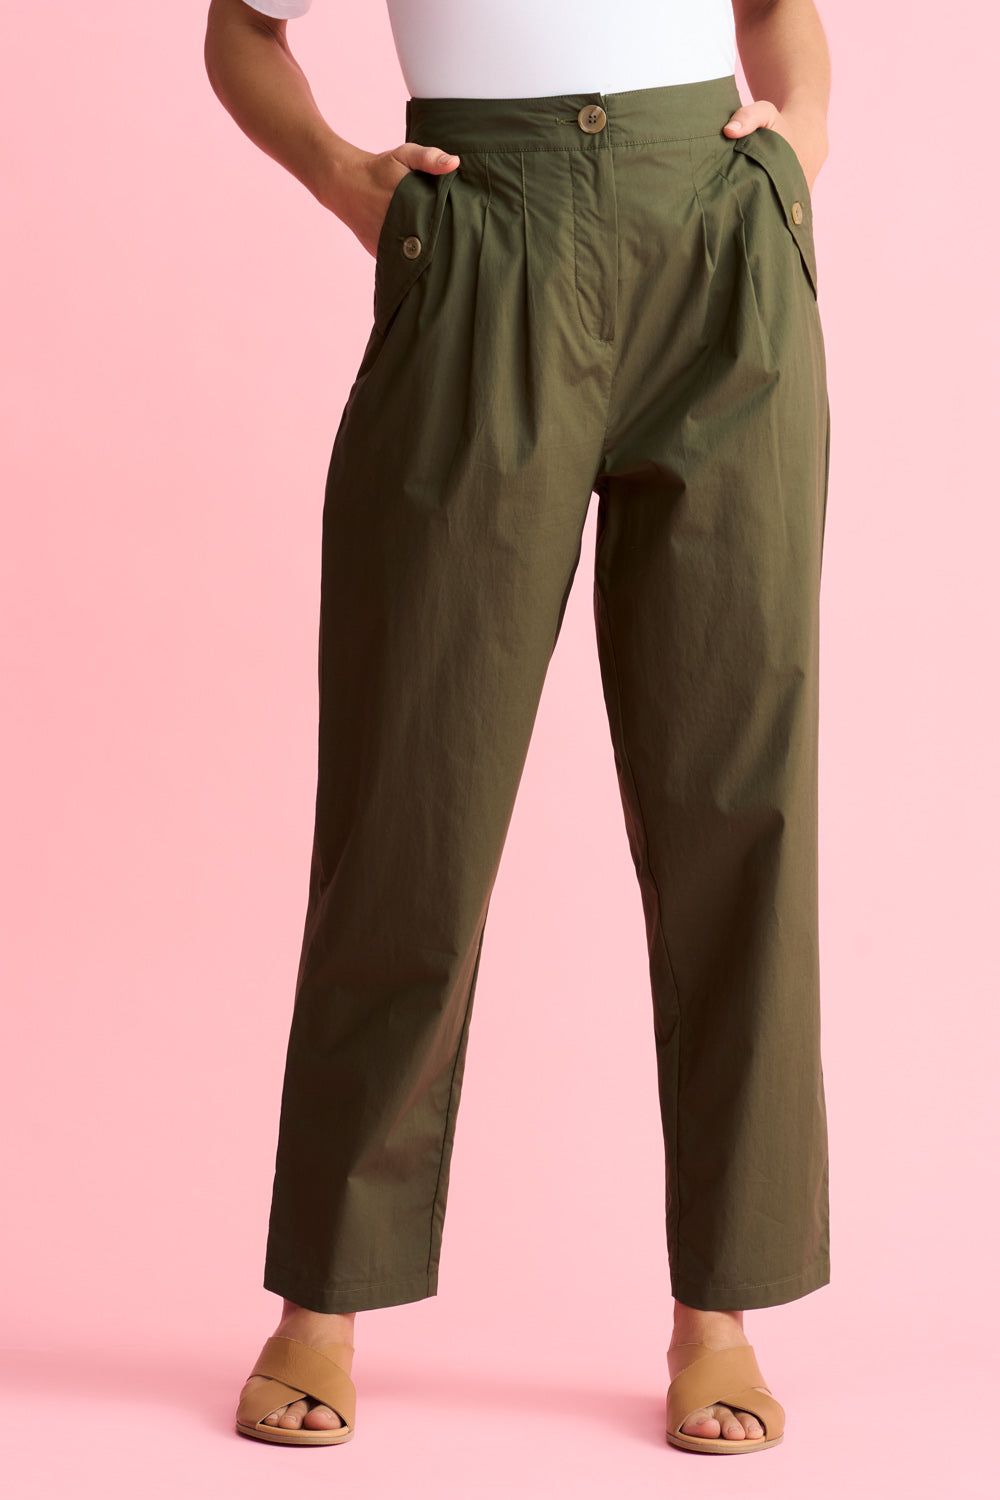 COTTON TWILL PANTS WITH TAB DETAILS | www.gamutgallerympls.com